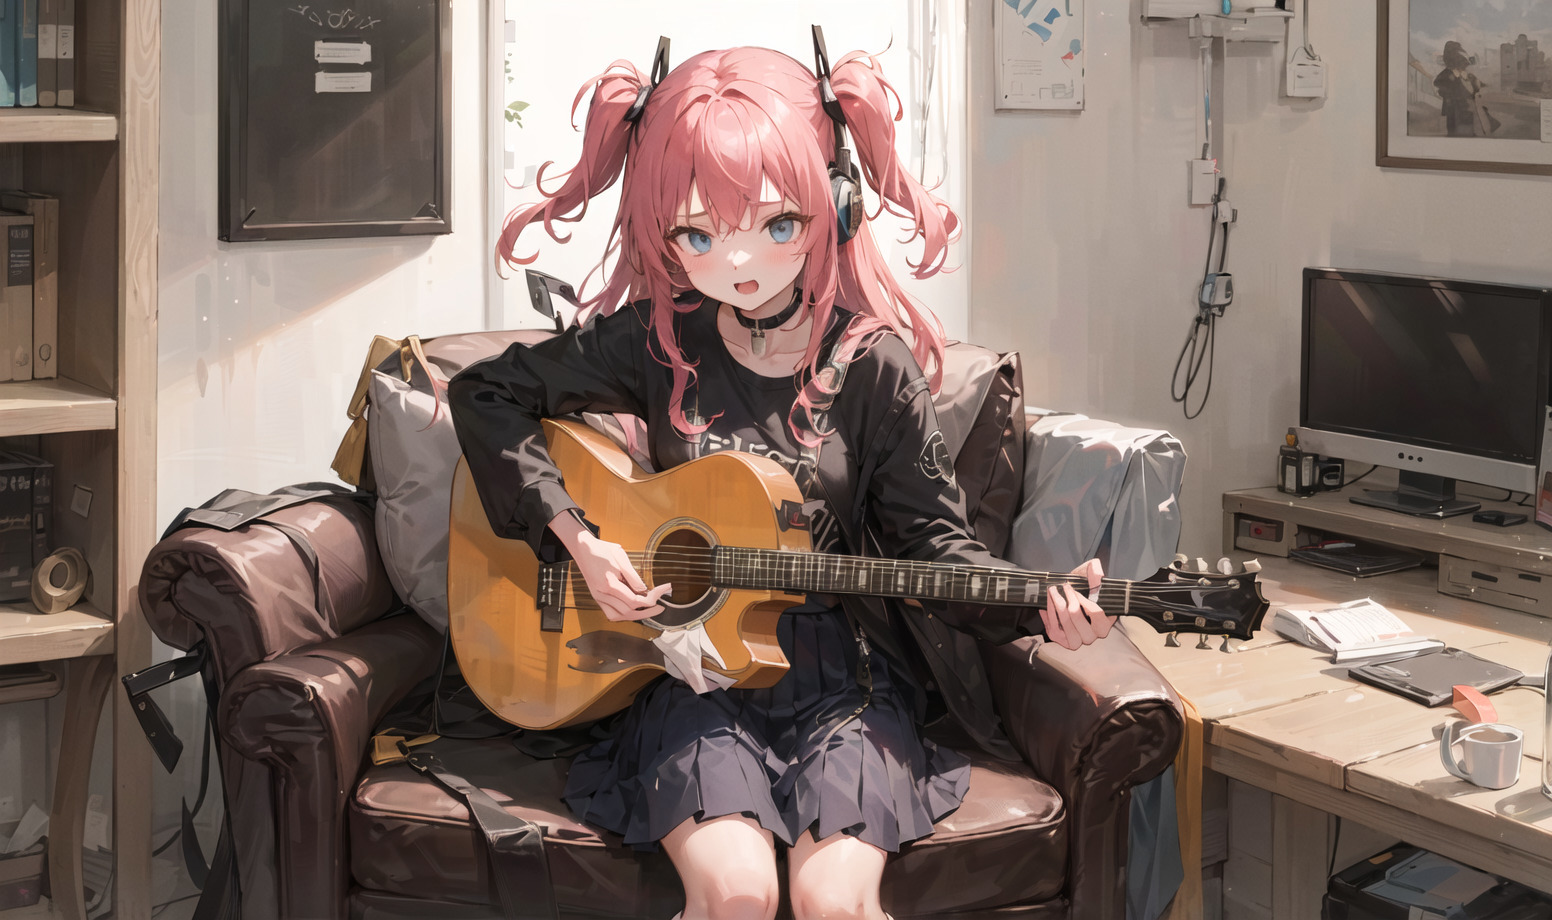 Pink-haired girl playing guitar on a couch.